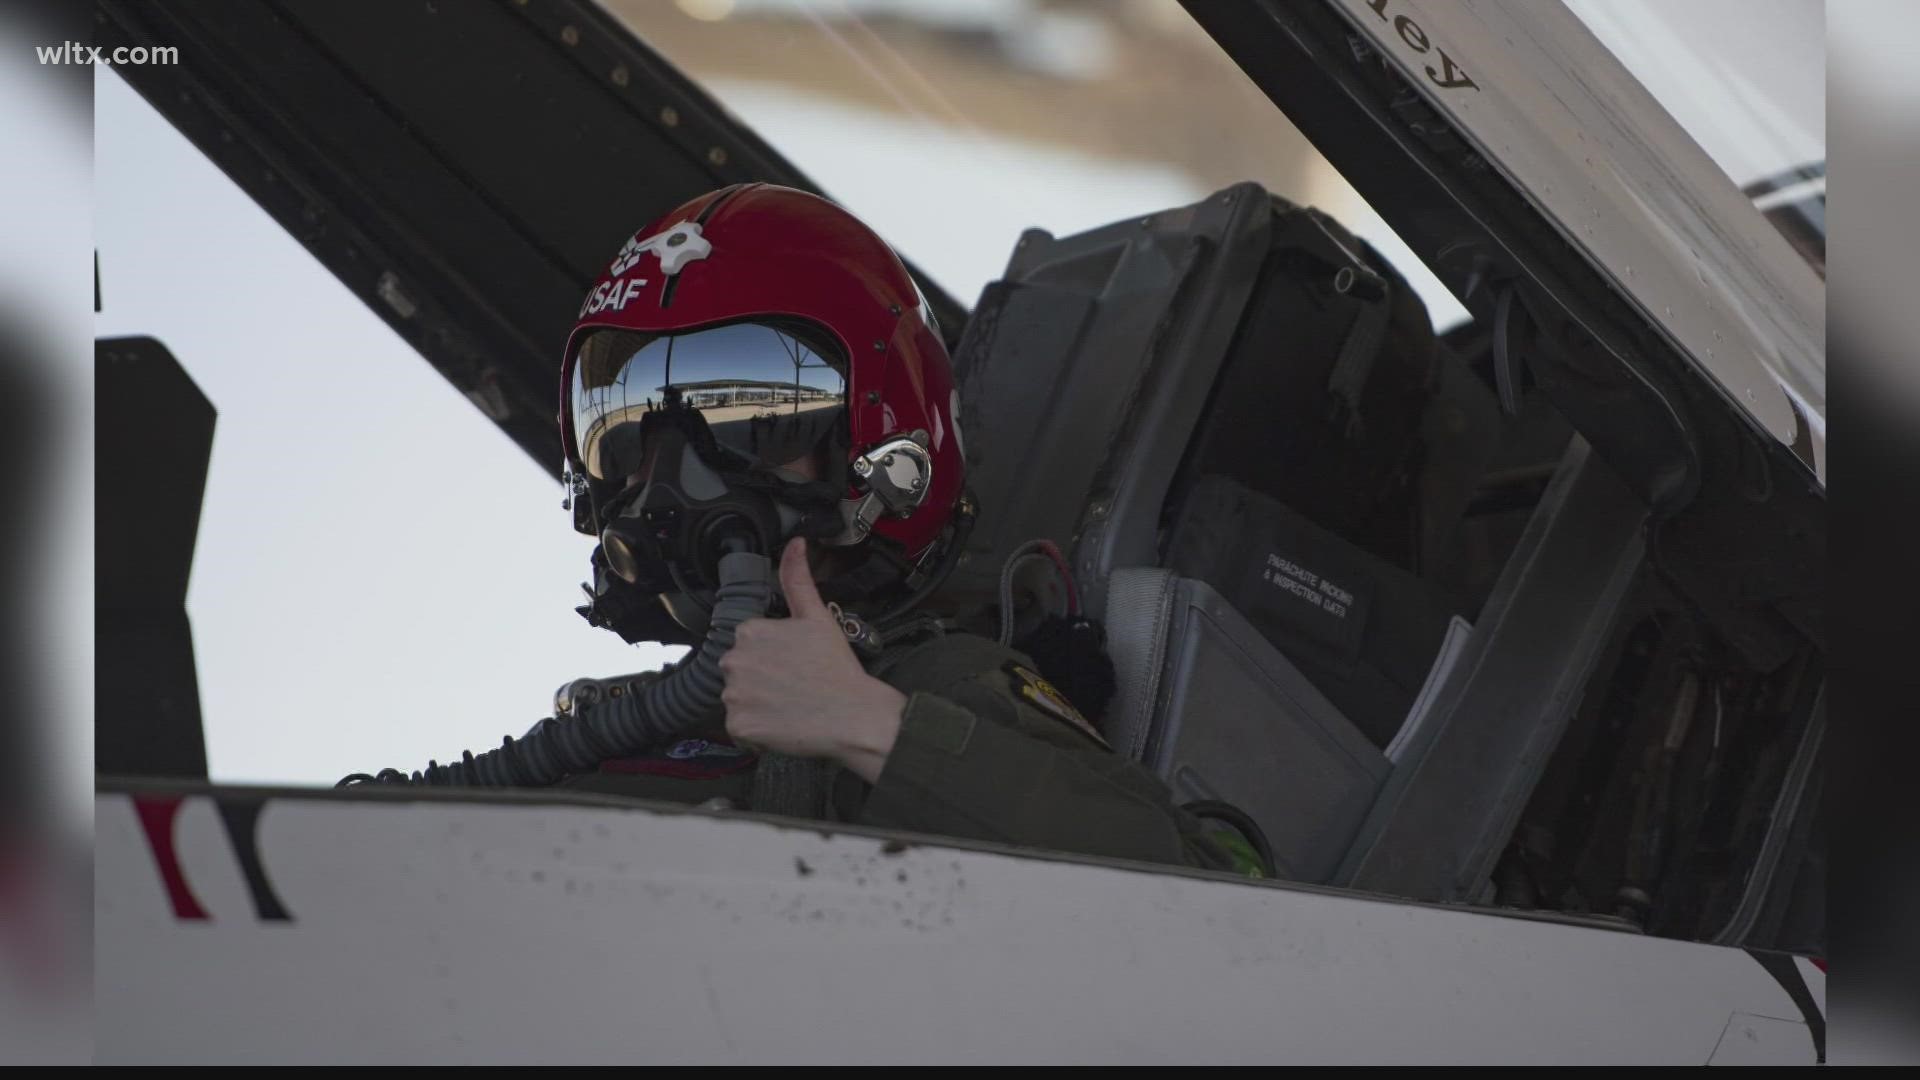 Jessica Varney has spent the last year working to prevent military and veteran suicides. On Friday, the Air Force Thunderbirds treated her to the ride of a lifetime.